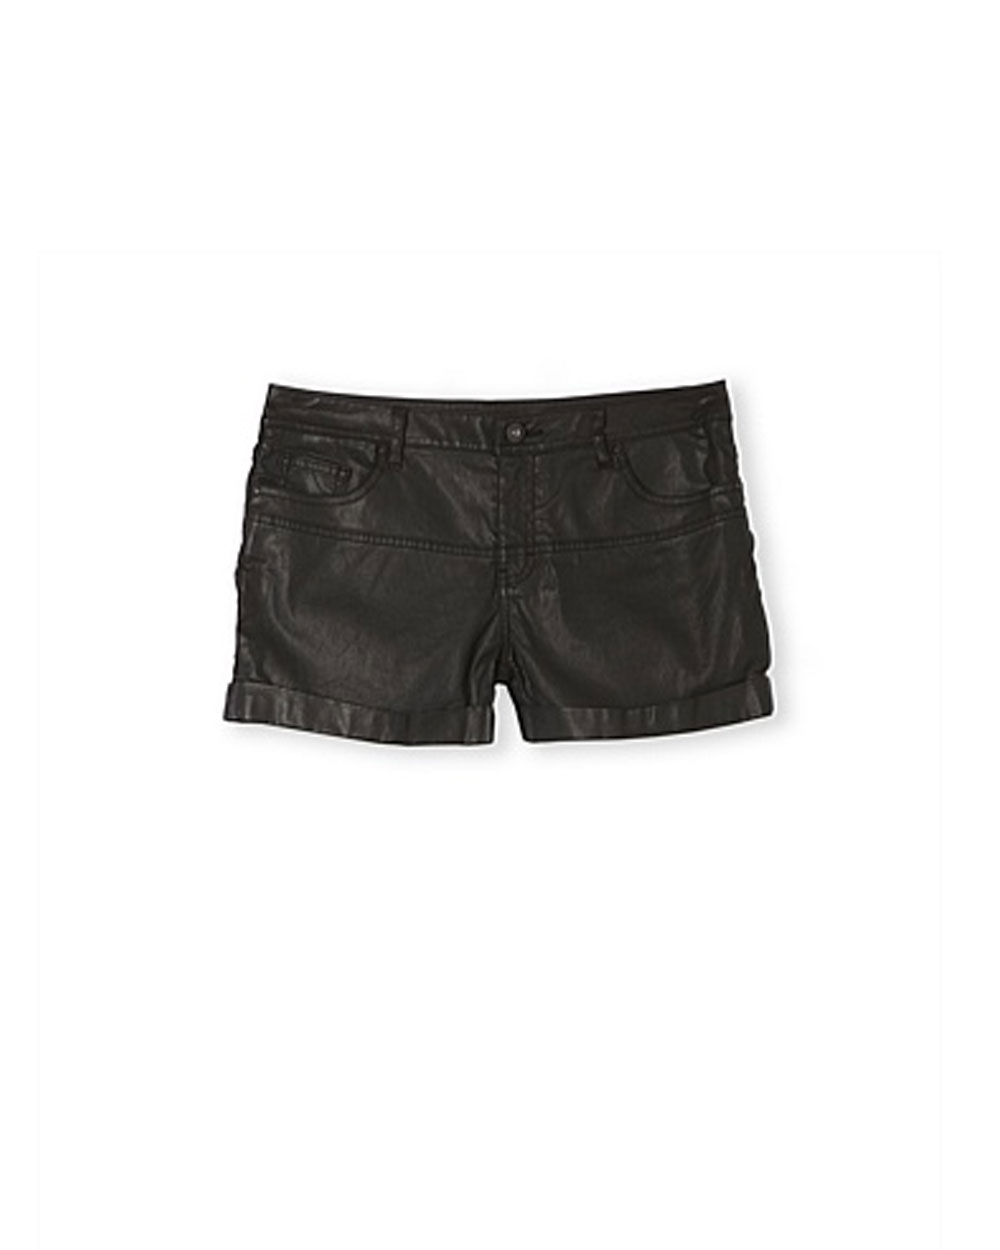 Wet look shorts from Country Road